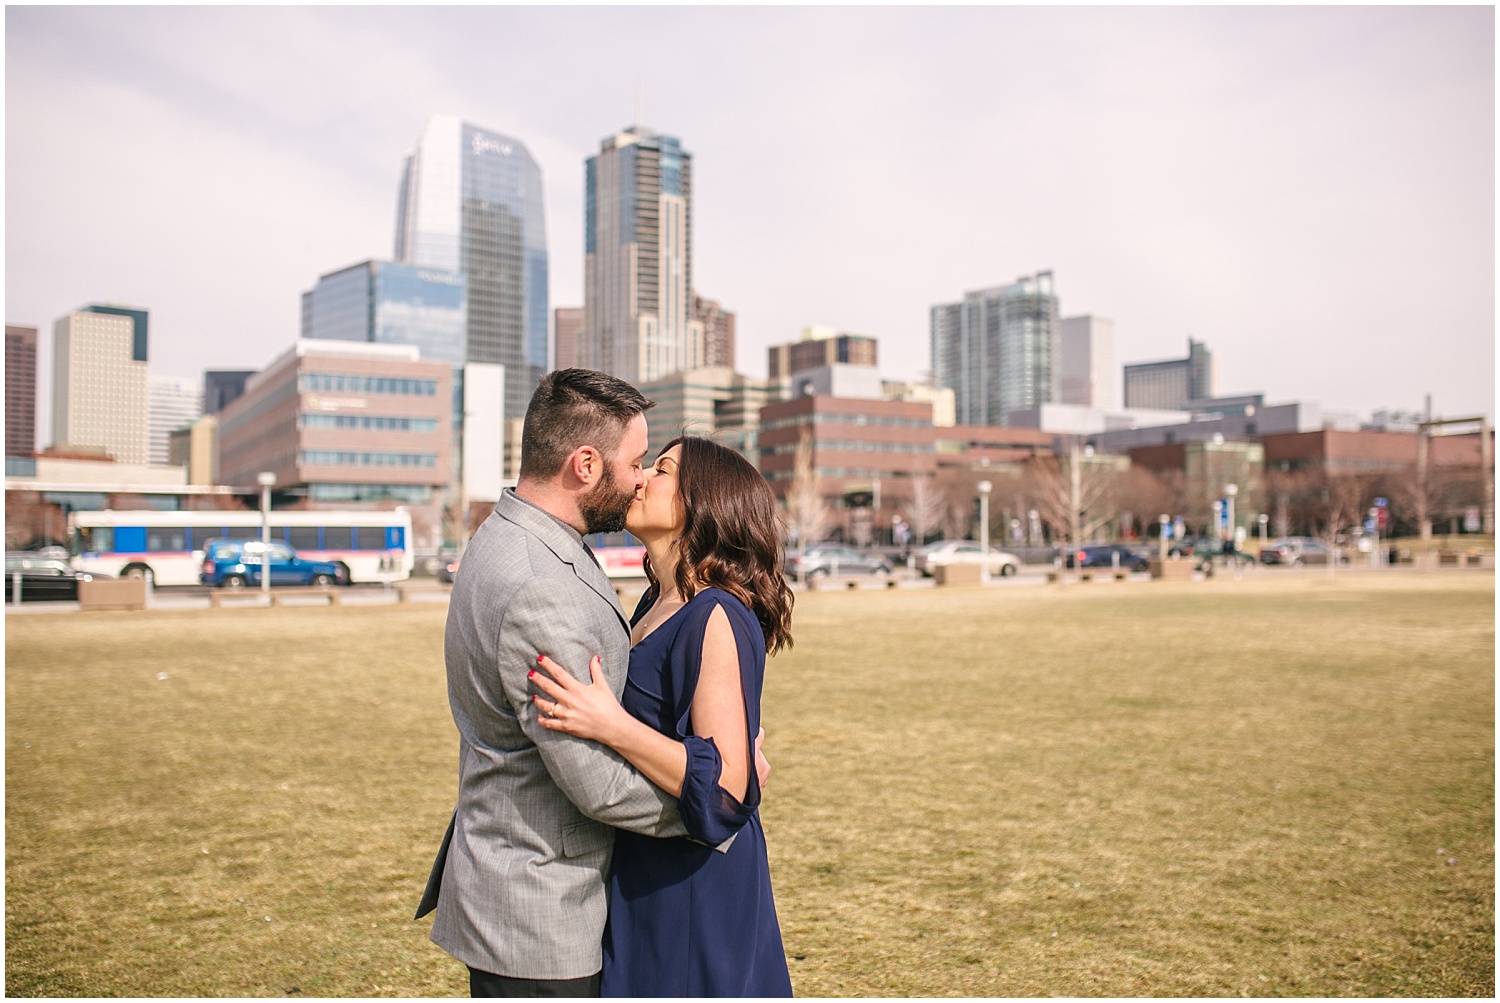 Downtown Denver engagement photos on the Tivoli quad overlooking the city.